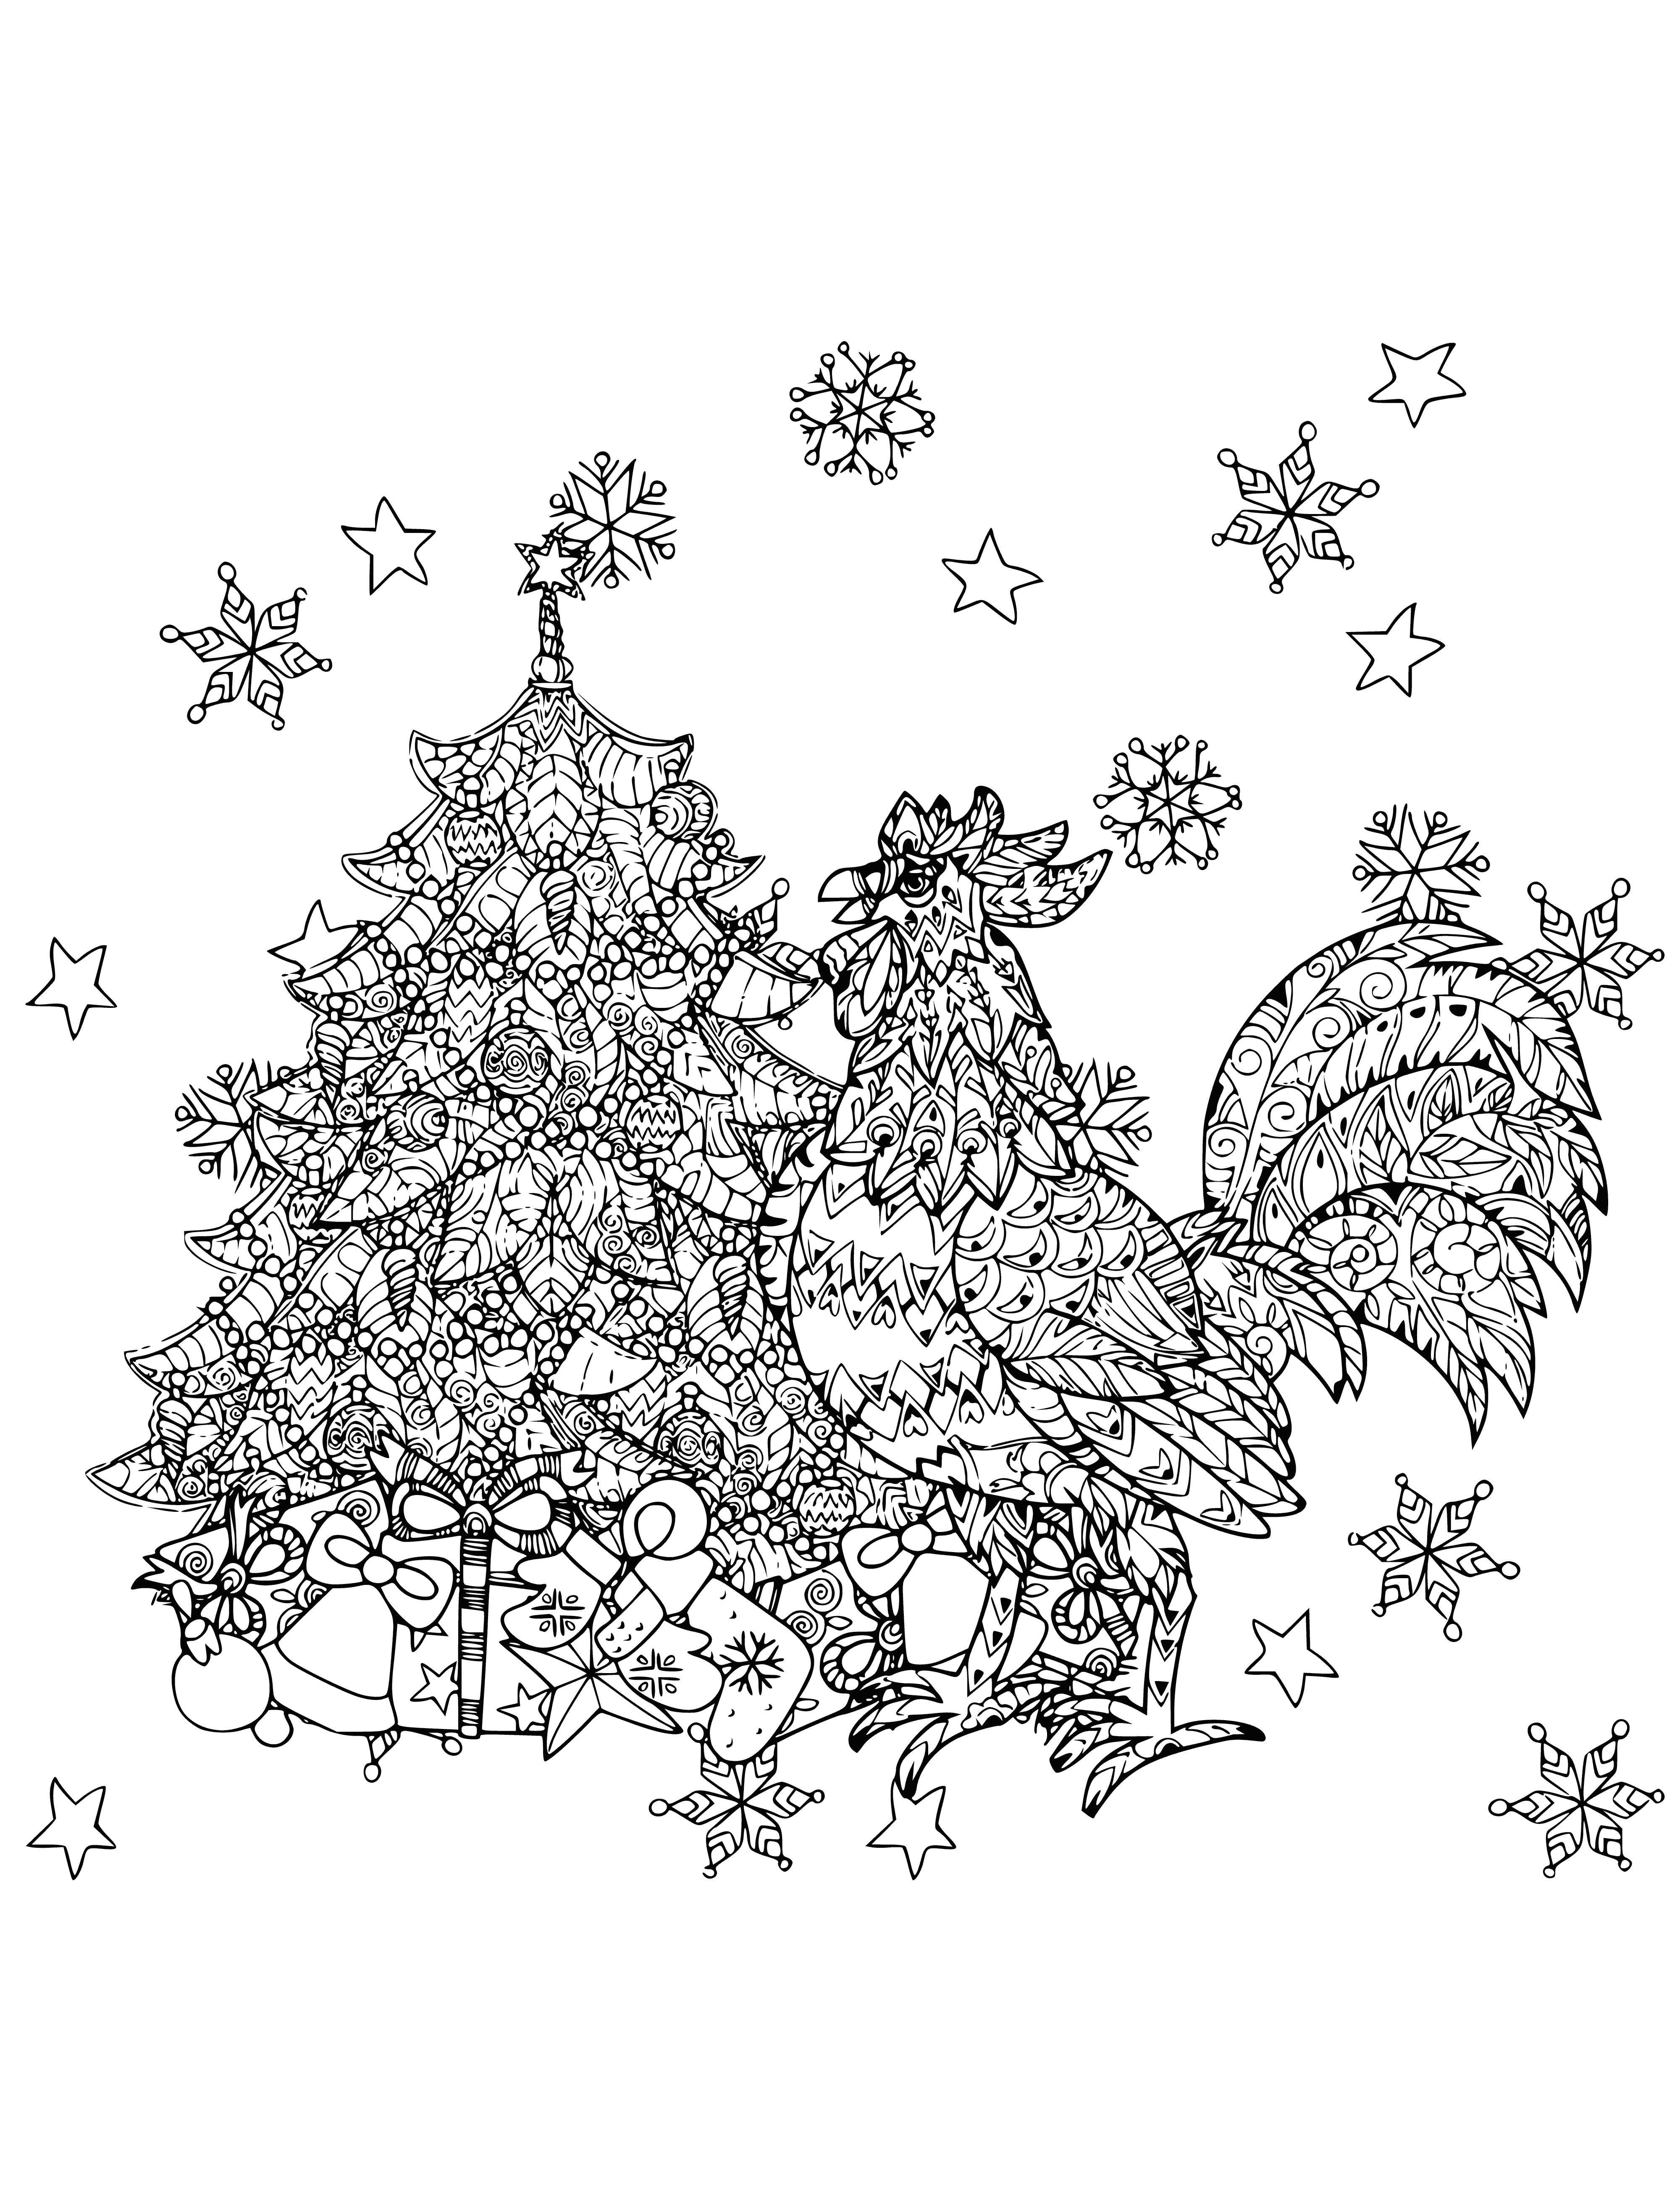 coloring page: A rooster atop a Christmas tree, lights in its beak, and snow on the ground. Bright red and green lights, with deep green leaves. #ChristmasMagic